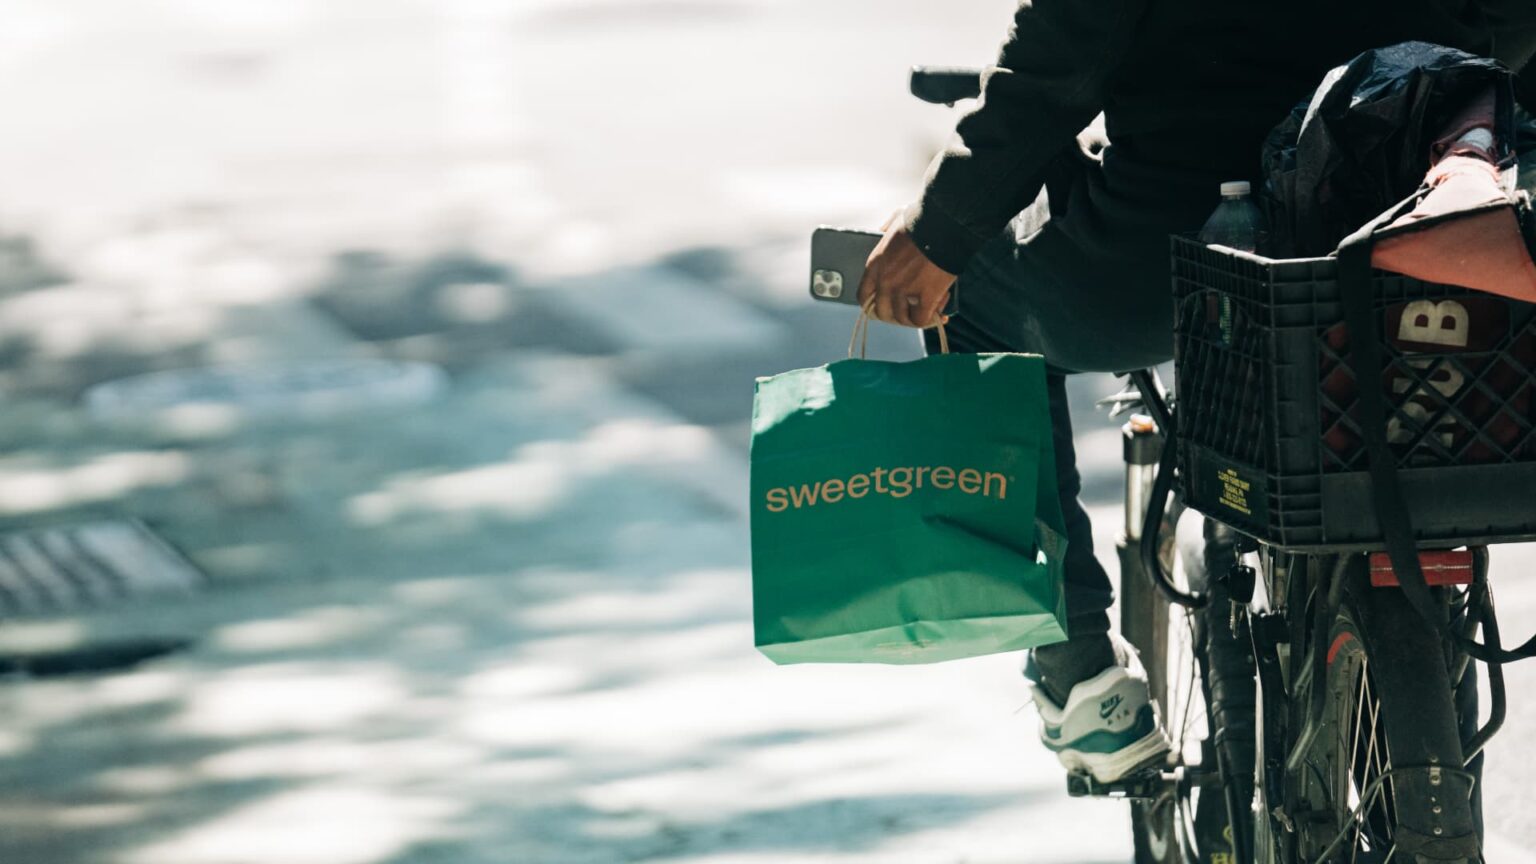 Sweetgreen, Chipotle and Wingstop aren't seeing a consumer slowdown